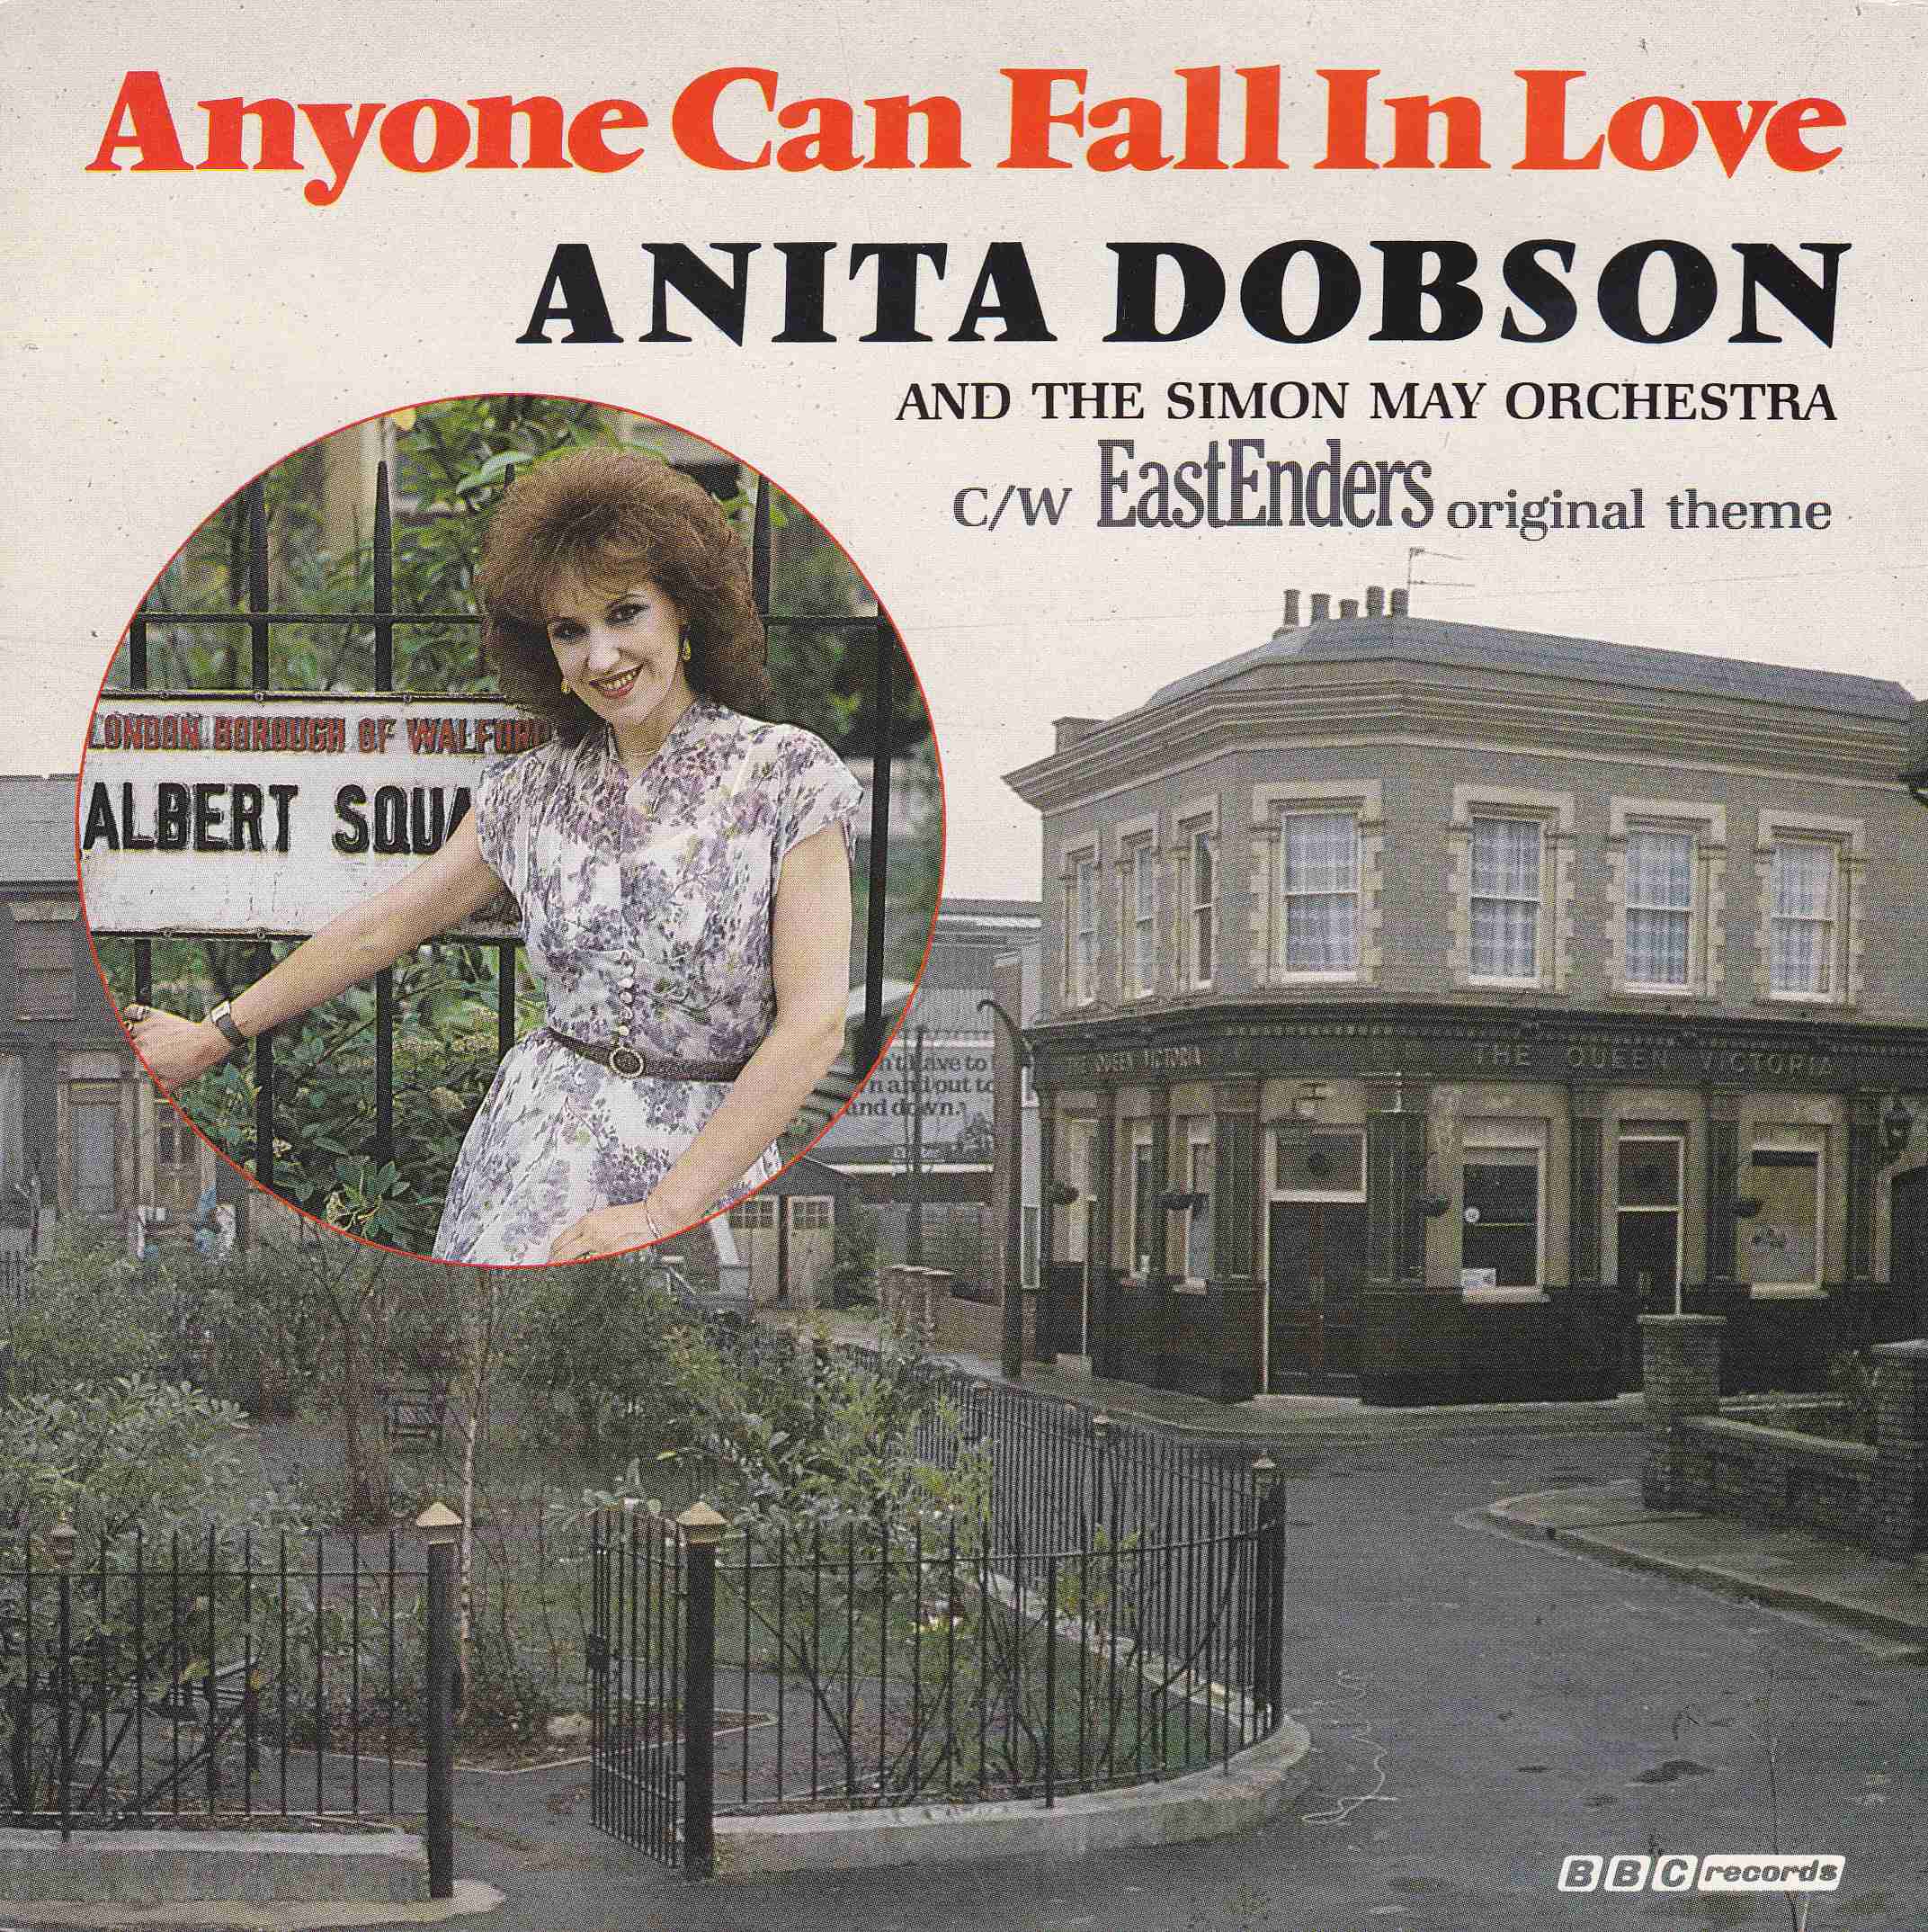 Picture of RESL 191 Anyone can fall in love (EastEnders) by artist Anita Dobson with the Simon May Orchestra from the BBC singles - Records and Tapes library